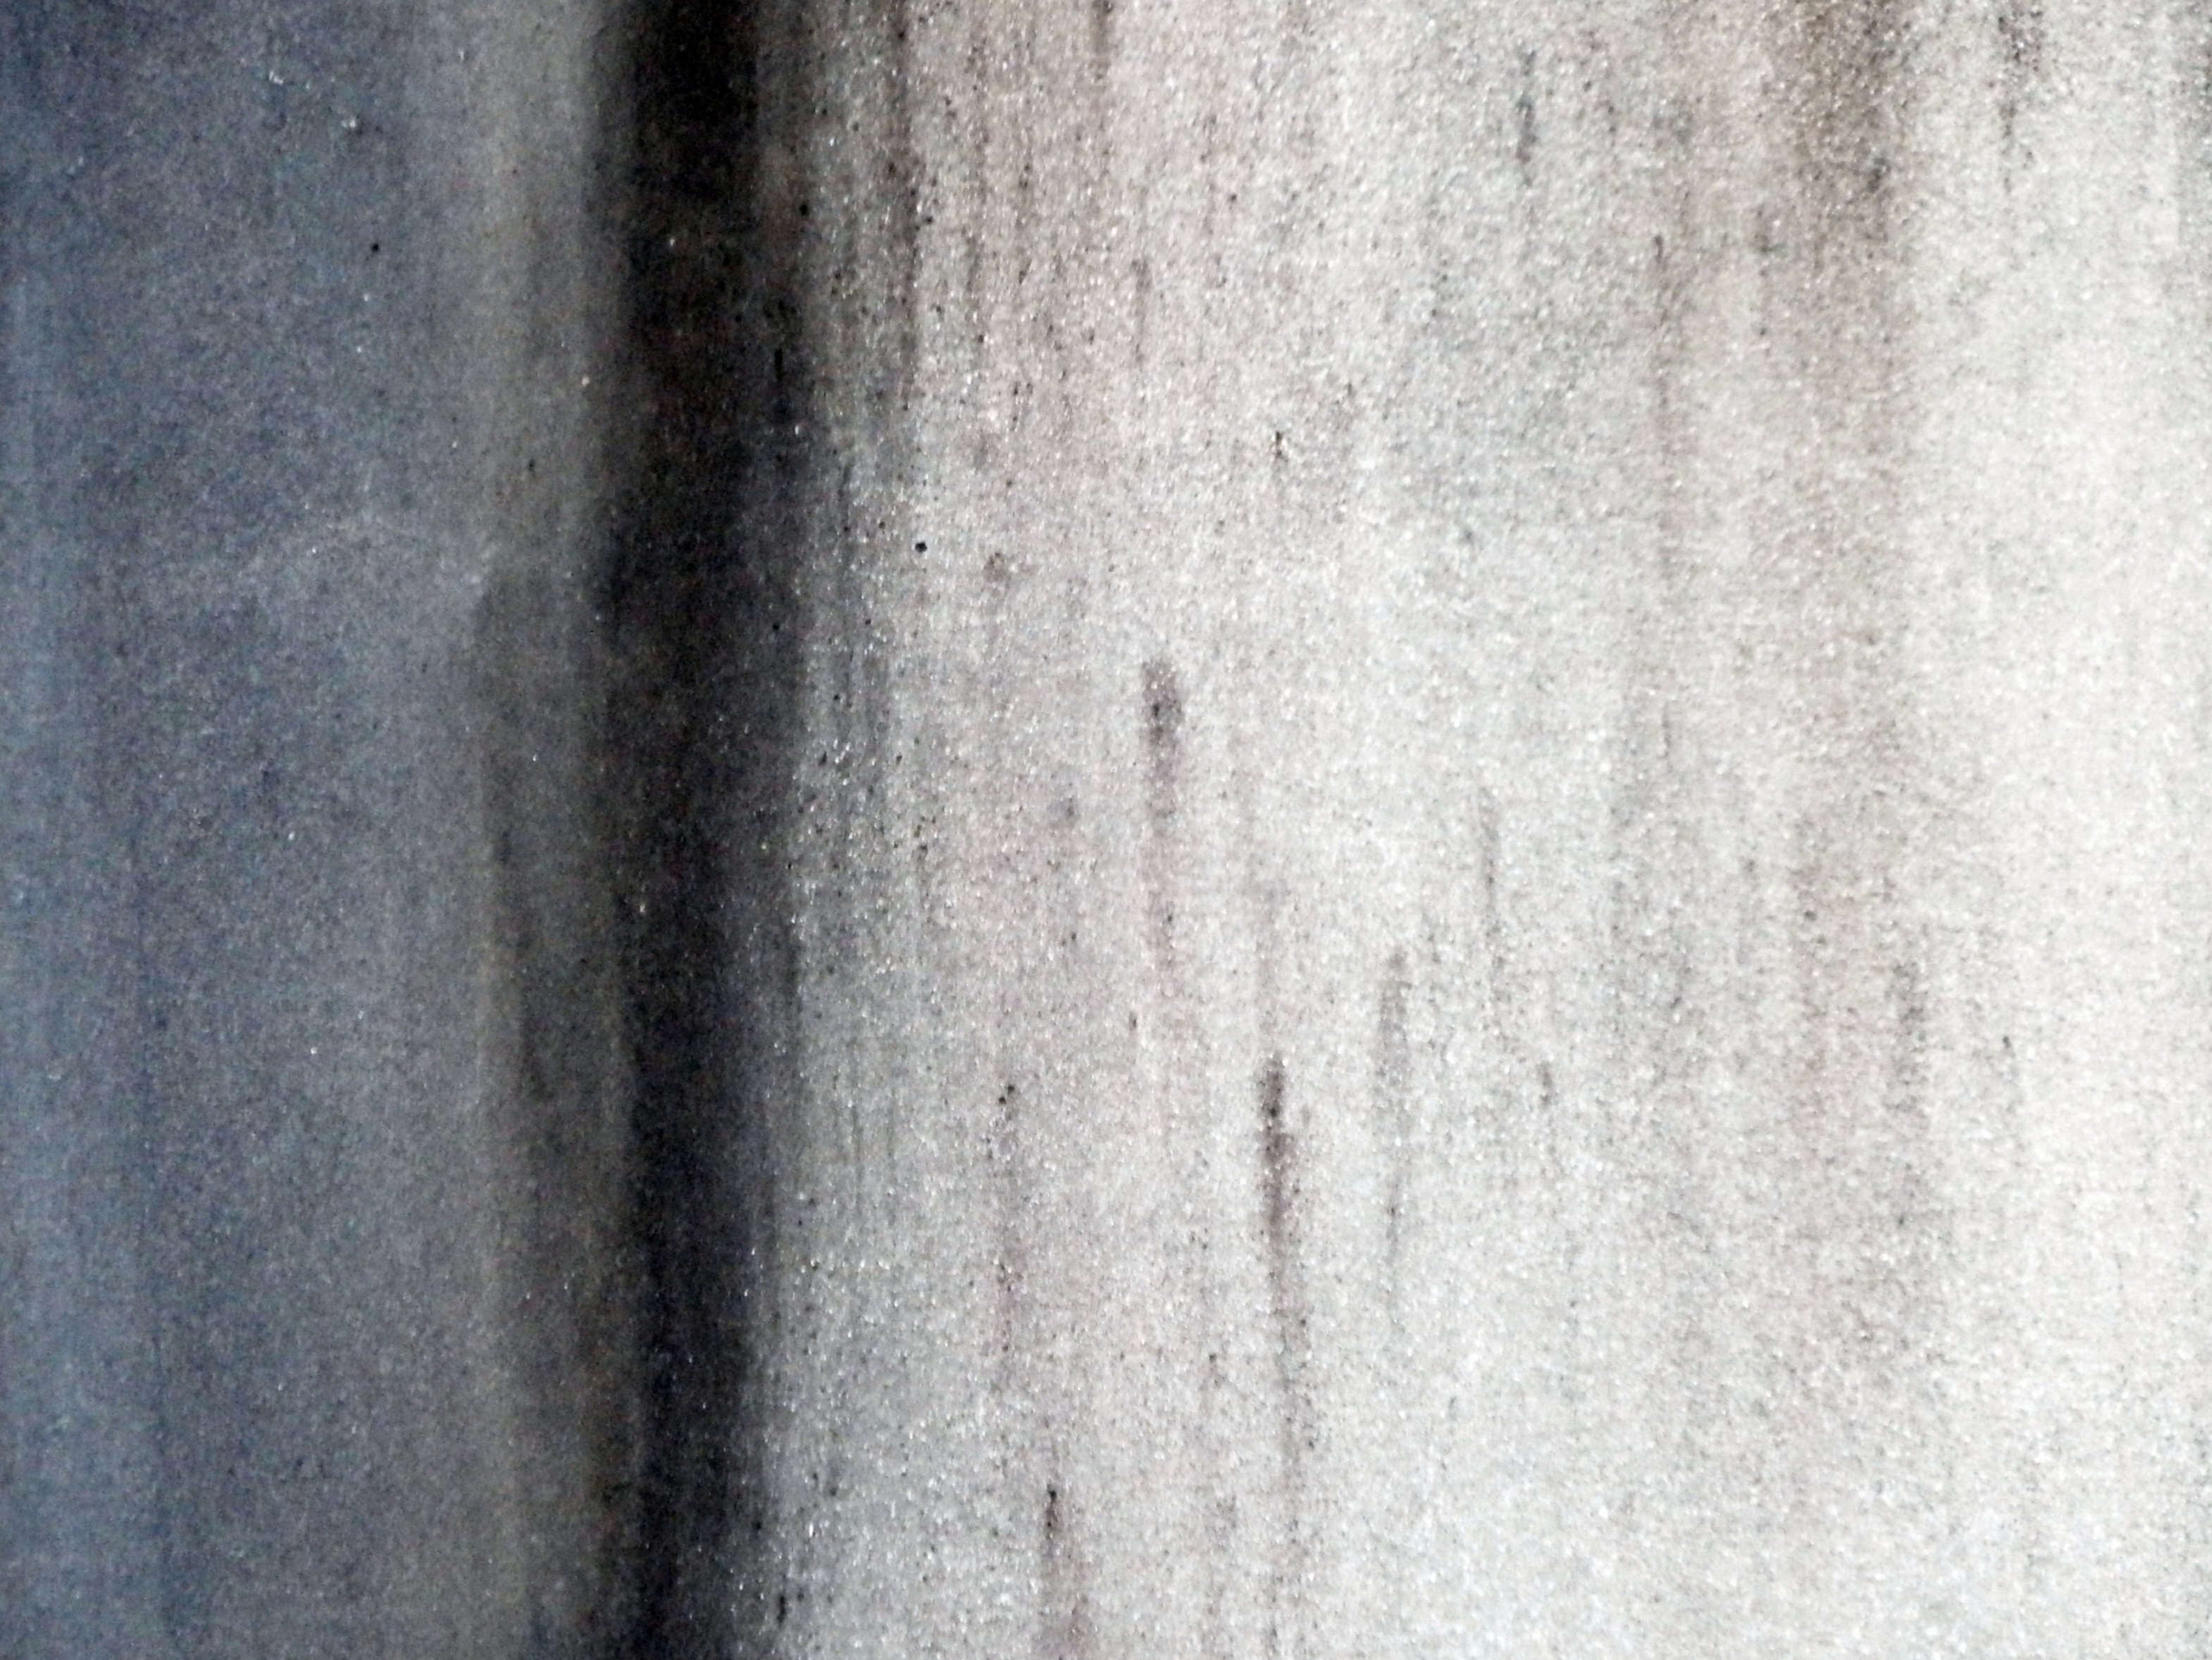 Dark Grey Concrete Texture, Abandoned, Surface, Old, Patterned, HQ Photo